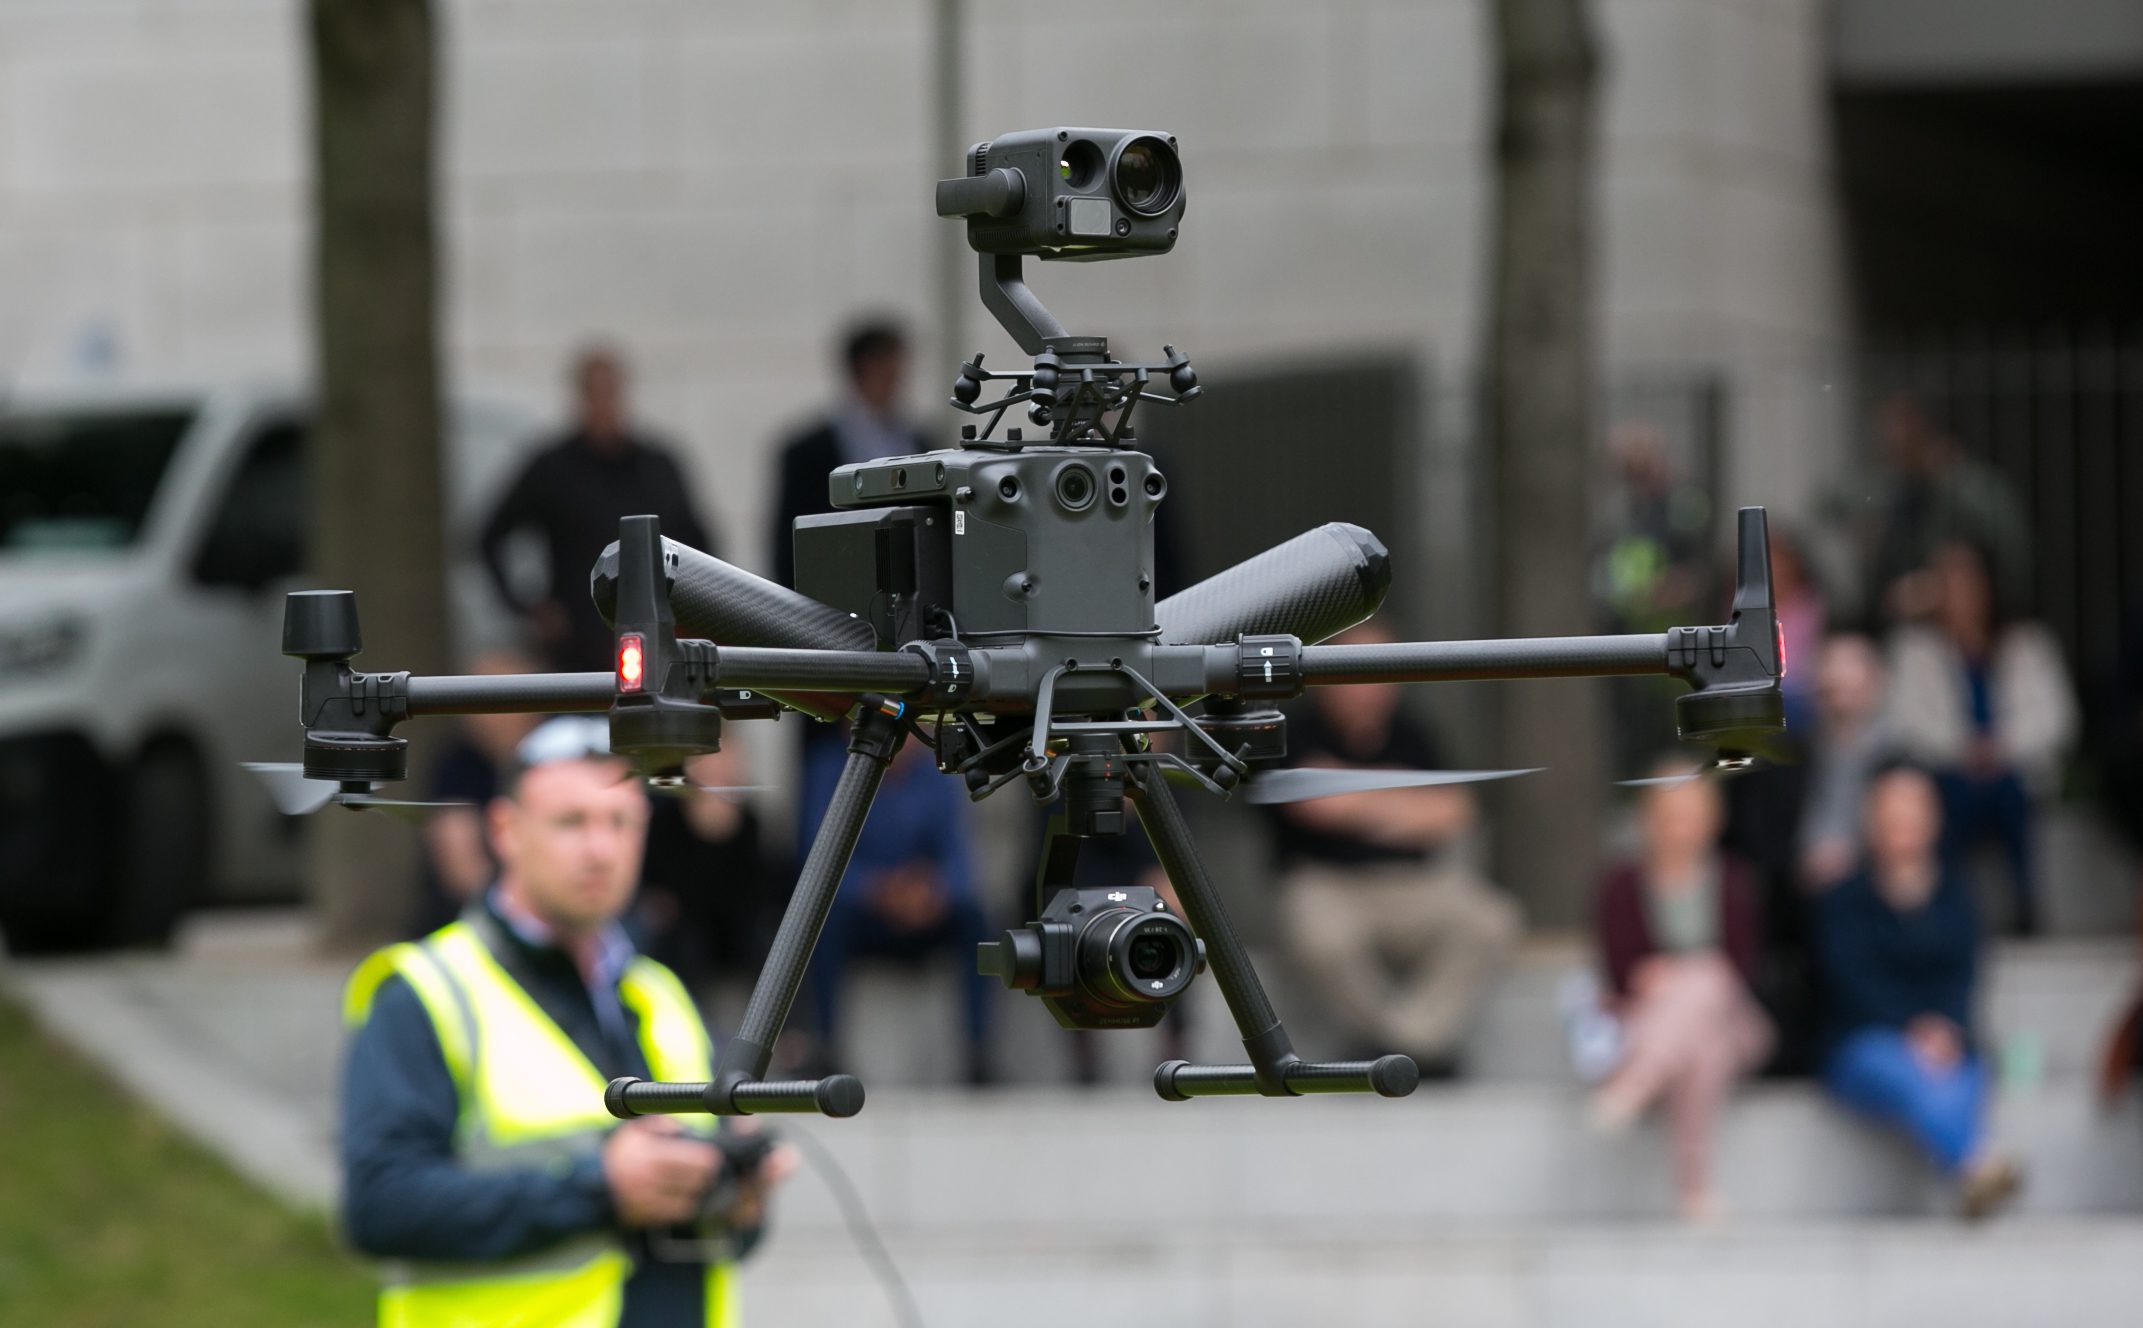 THOUSANDS OF DRONES FORECAST TO BE IN OPERATION BY 2030